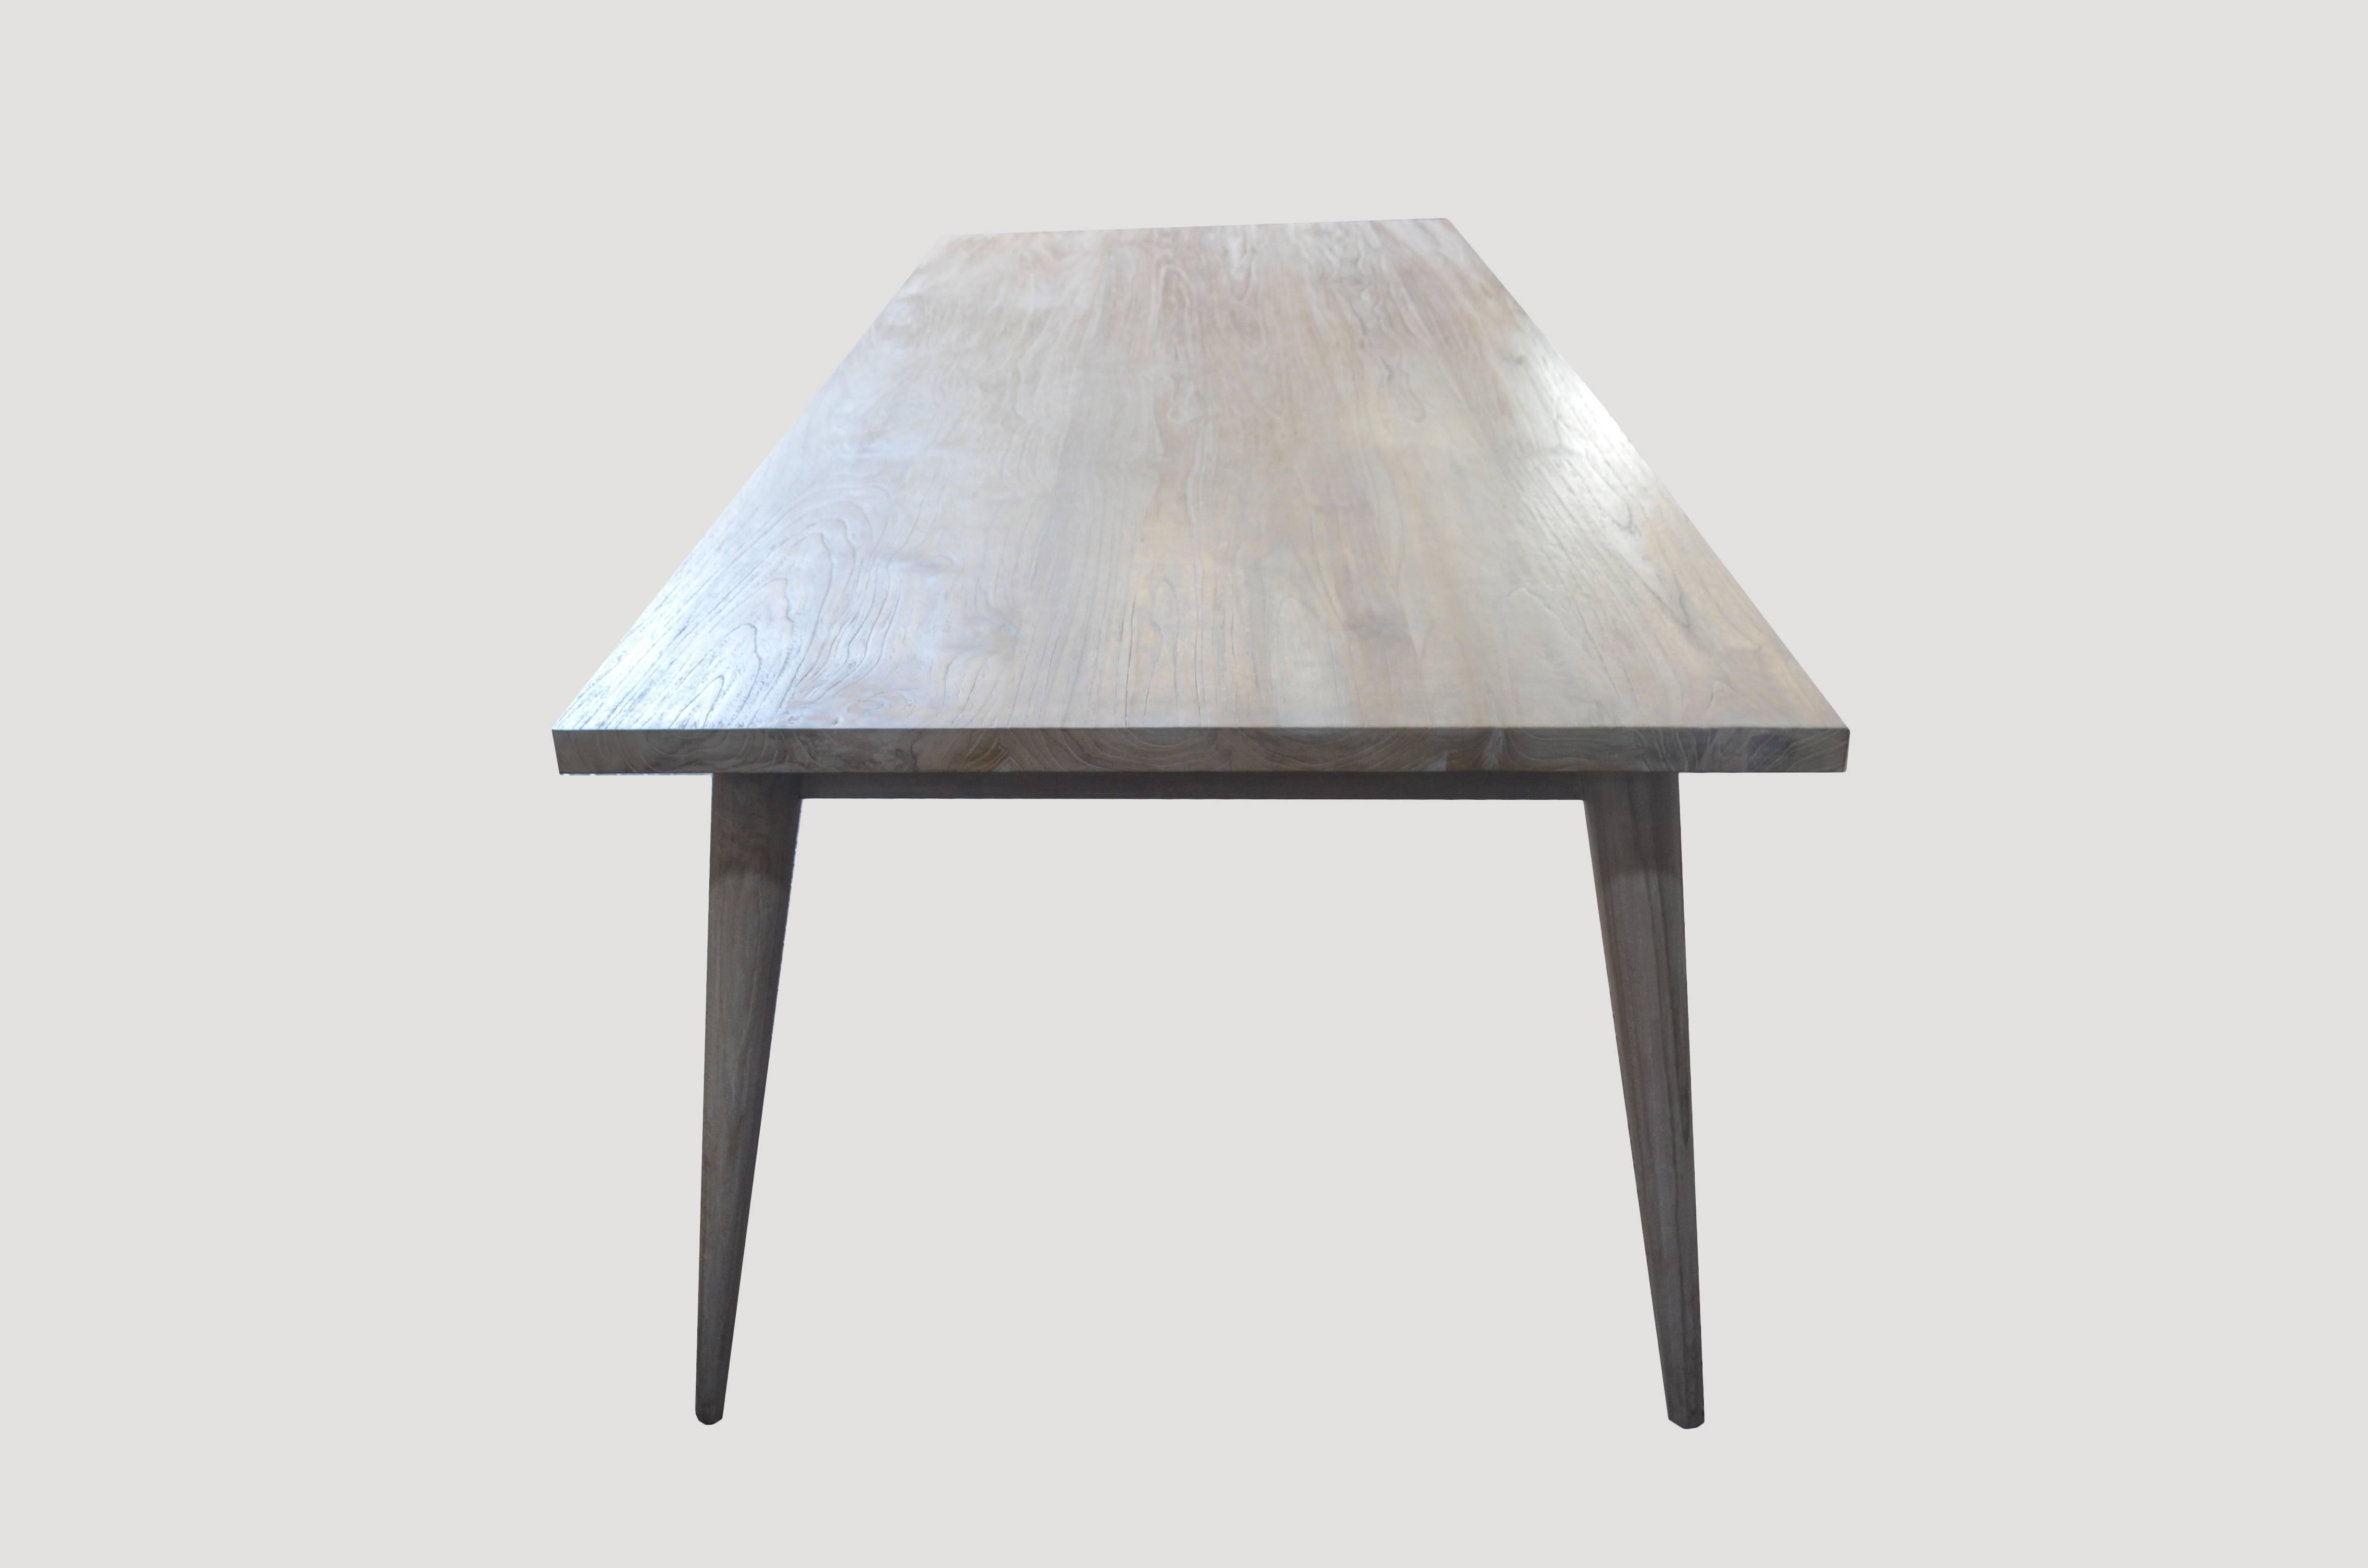 St. Barts white washed reclaimed teak wood dining table with modern lines set on a mid century style base.

The St. Barts Collection features an exciting new line of organic white wash, bleached and natural weathered teak furniture. The reclaimed